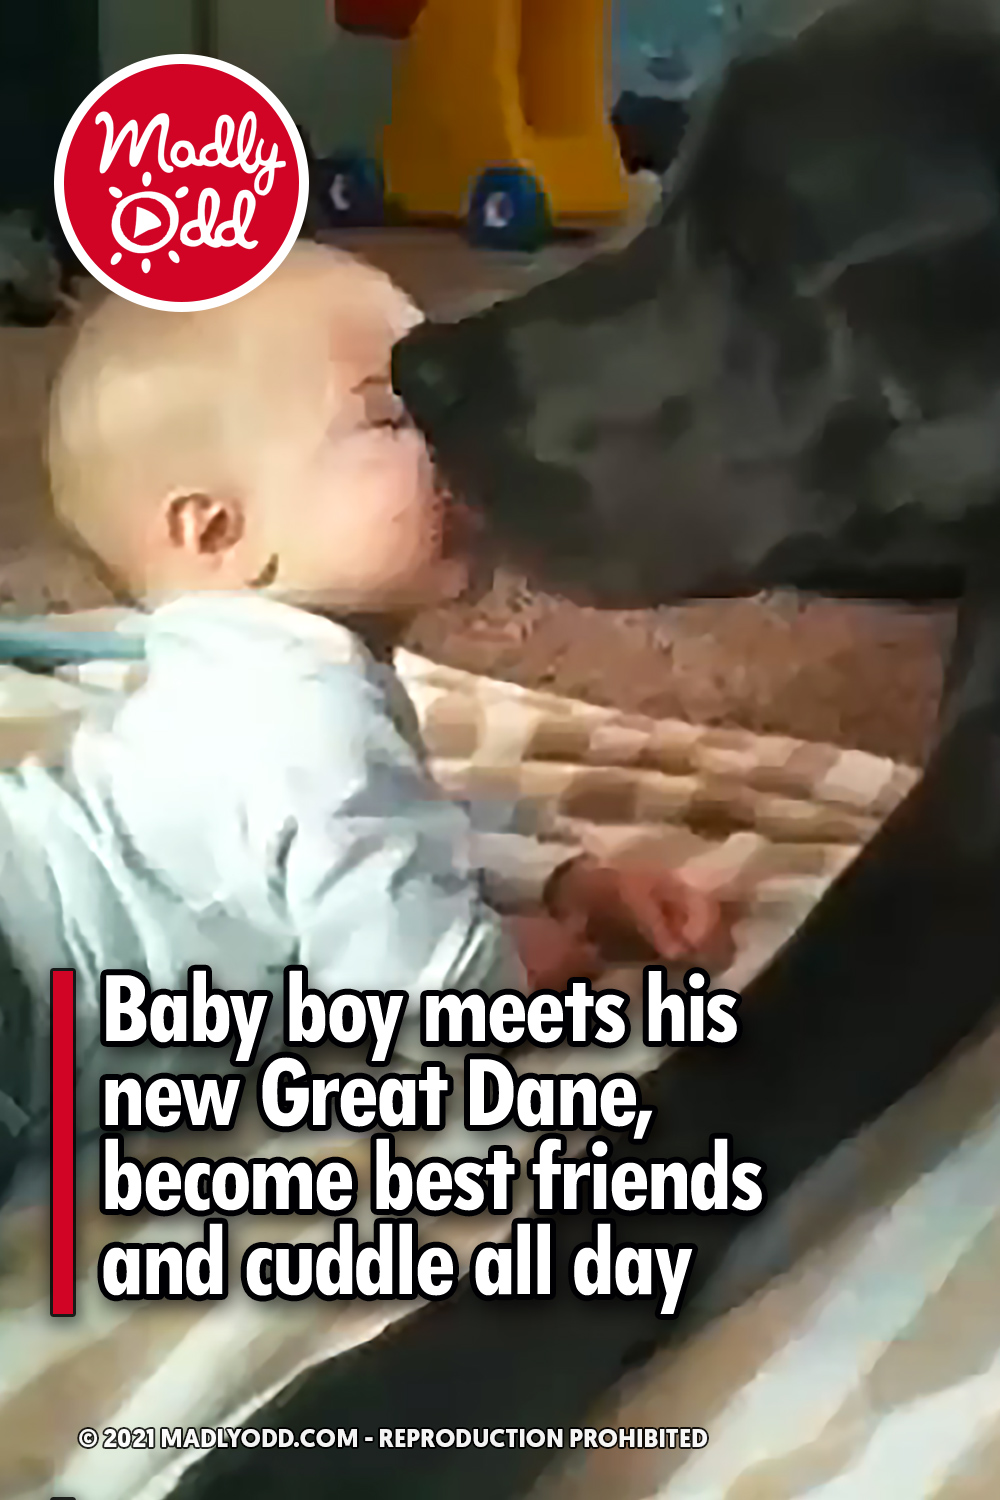 Baby boy meets his new Great Dane, become best friends and cuddle all day